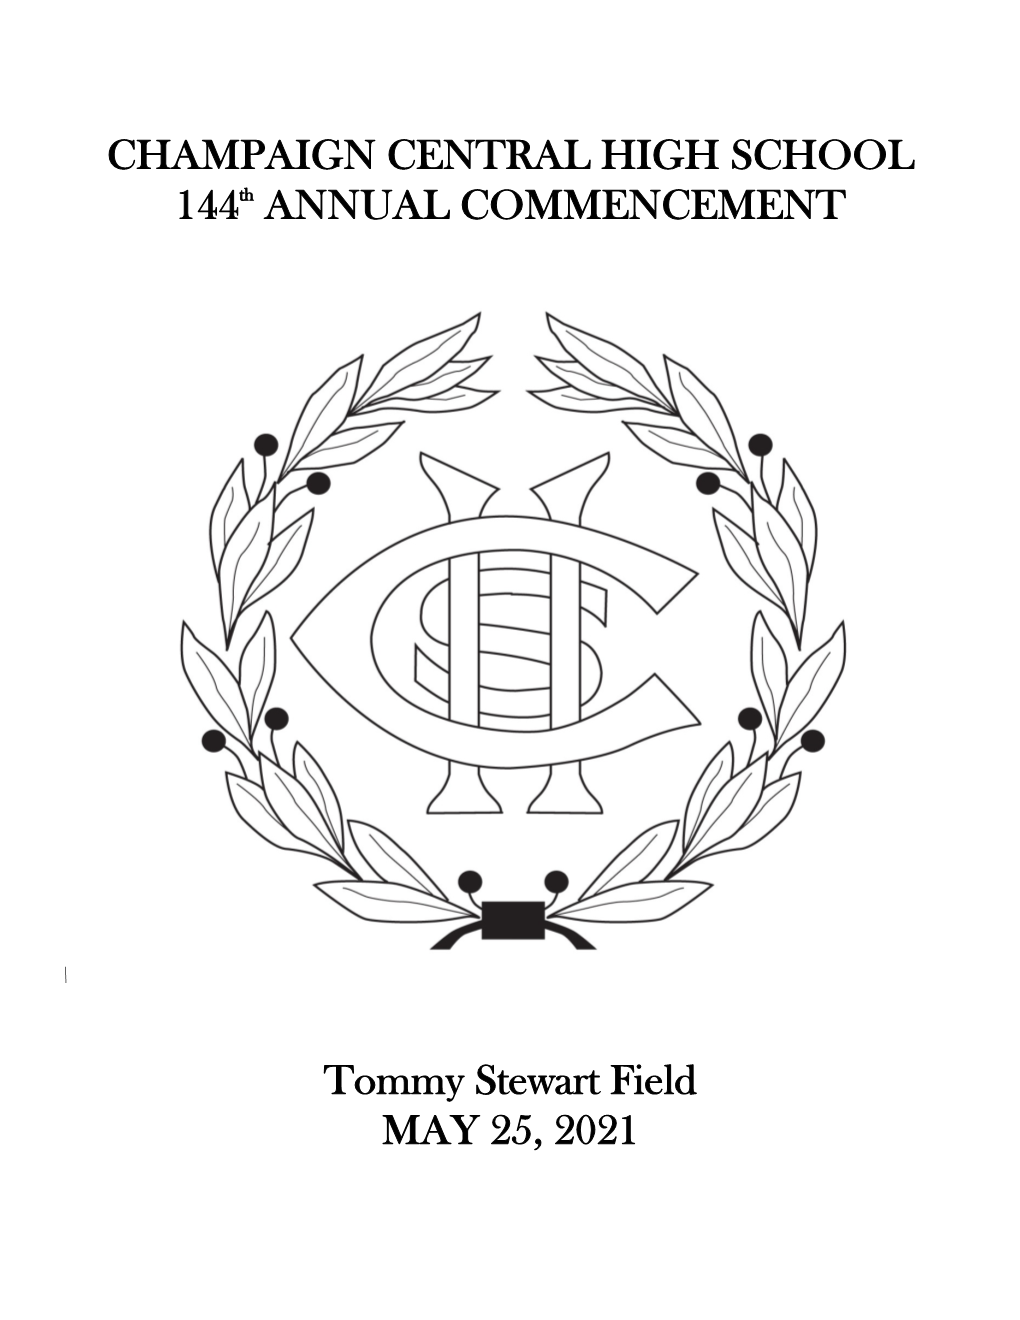 CHAMPAIGN CENTRAL HIGH SCHOOL 144Th ANNUAL COMMENCEMENT Tommy Stewart Field MAY 25, 2021